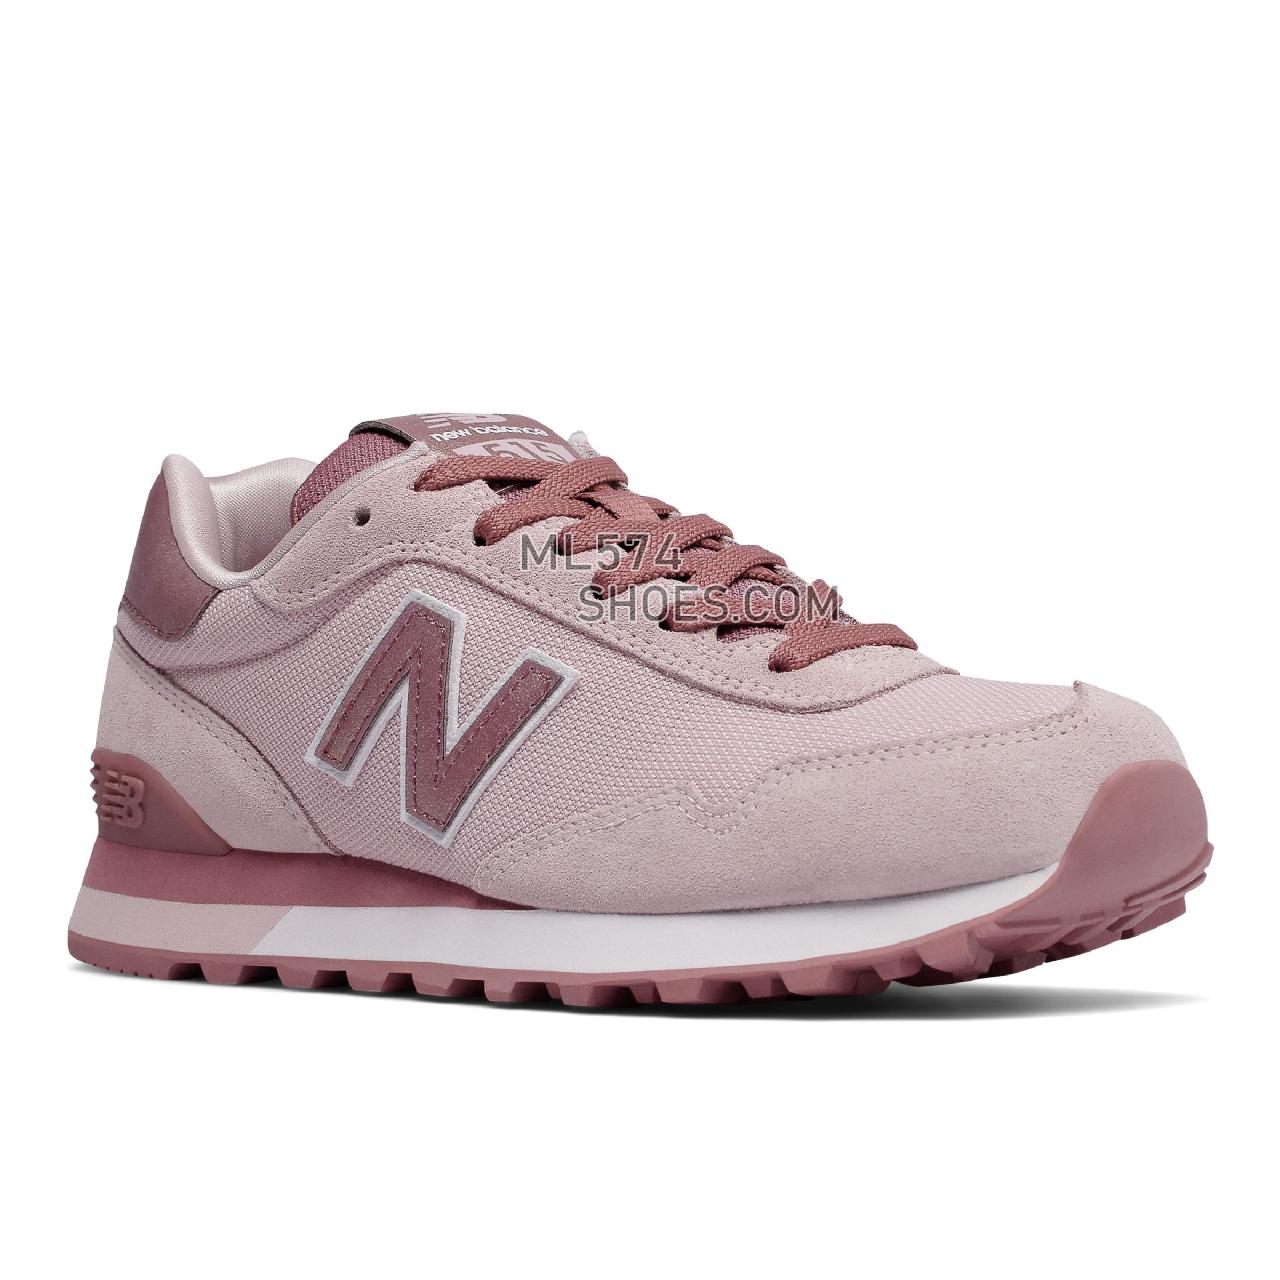 New Balance 515 Classic - Women's Classic Sneakers - Conch Shell with Dark Oxide - WL515CSC